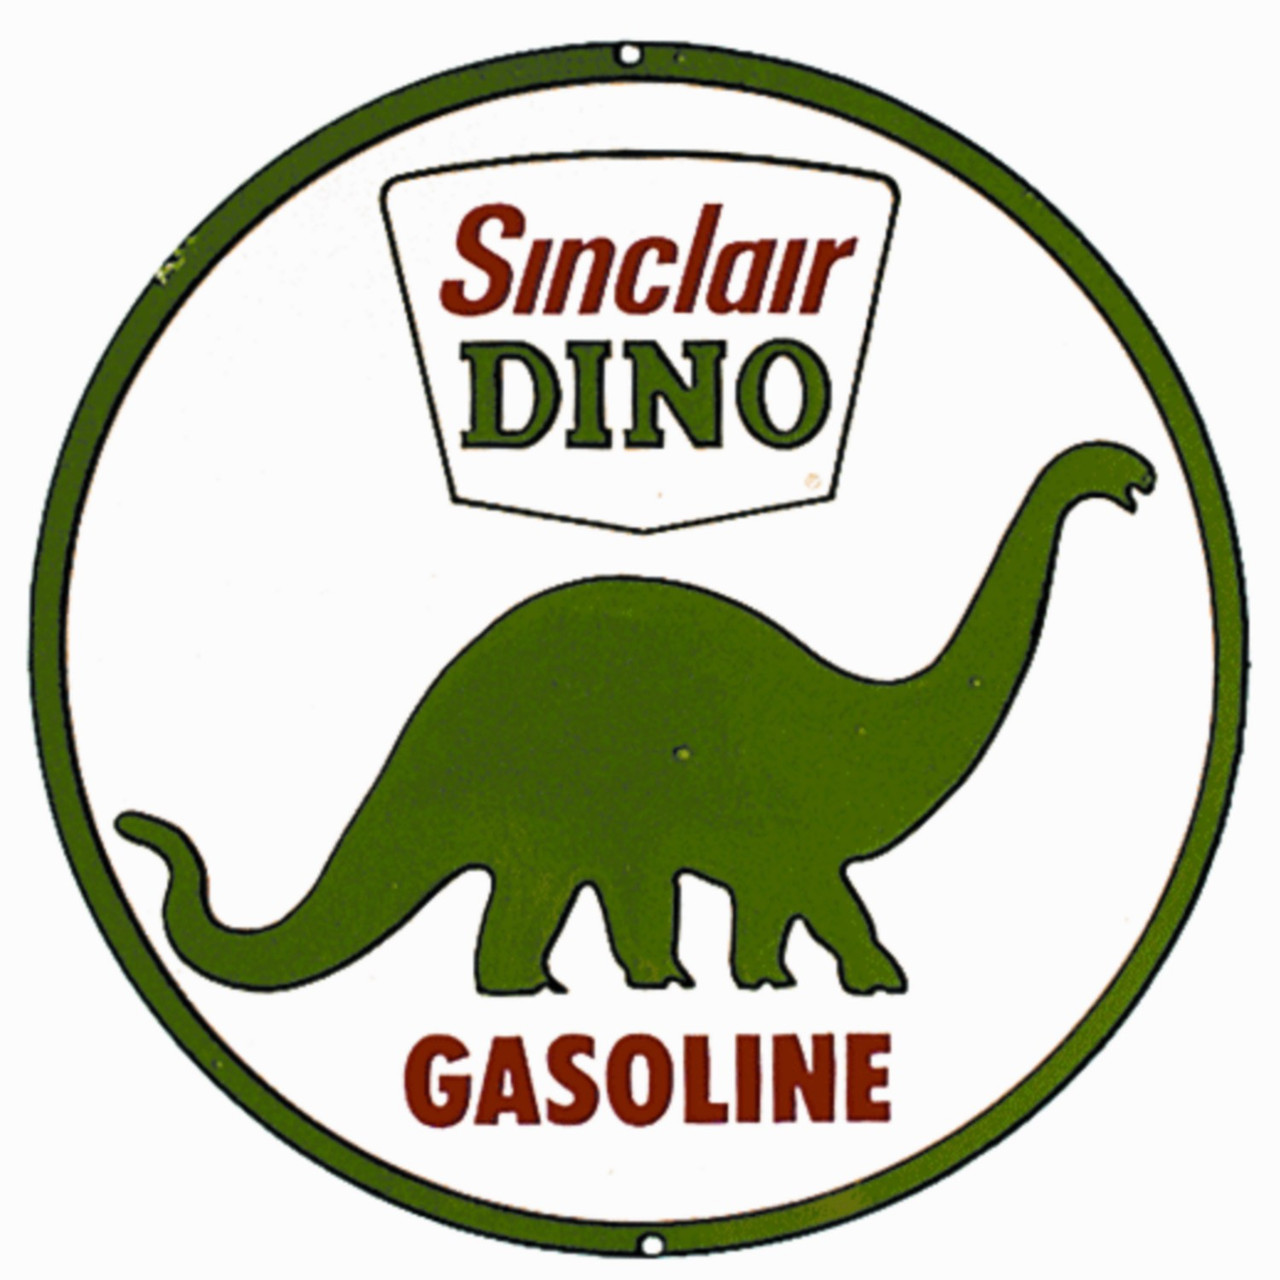 Set of 4 Coaters Sinclair Dino Gasoline